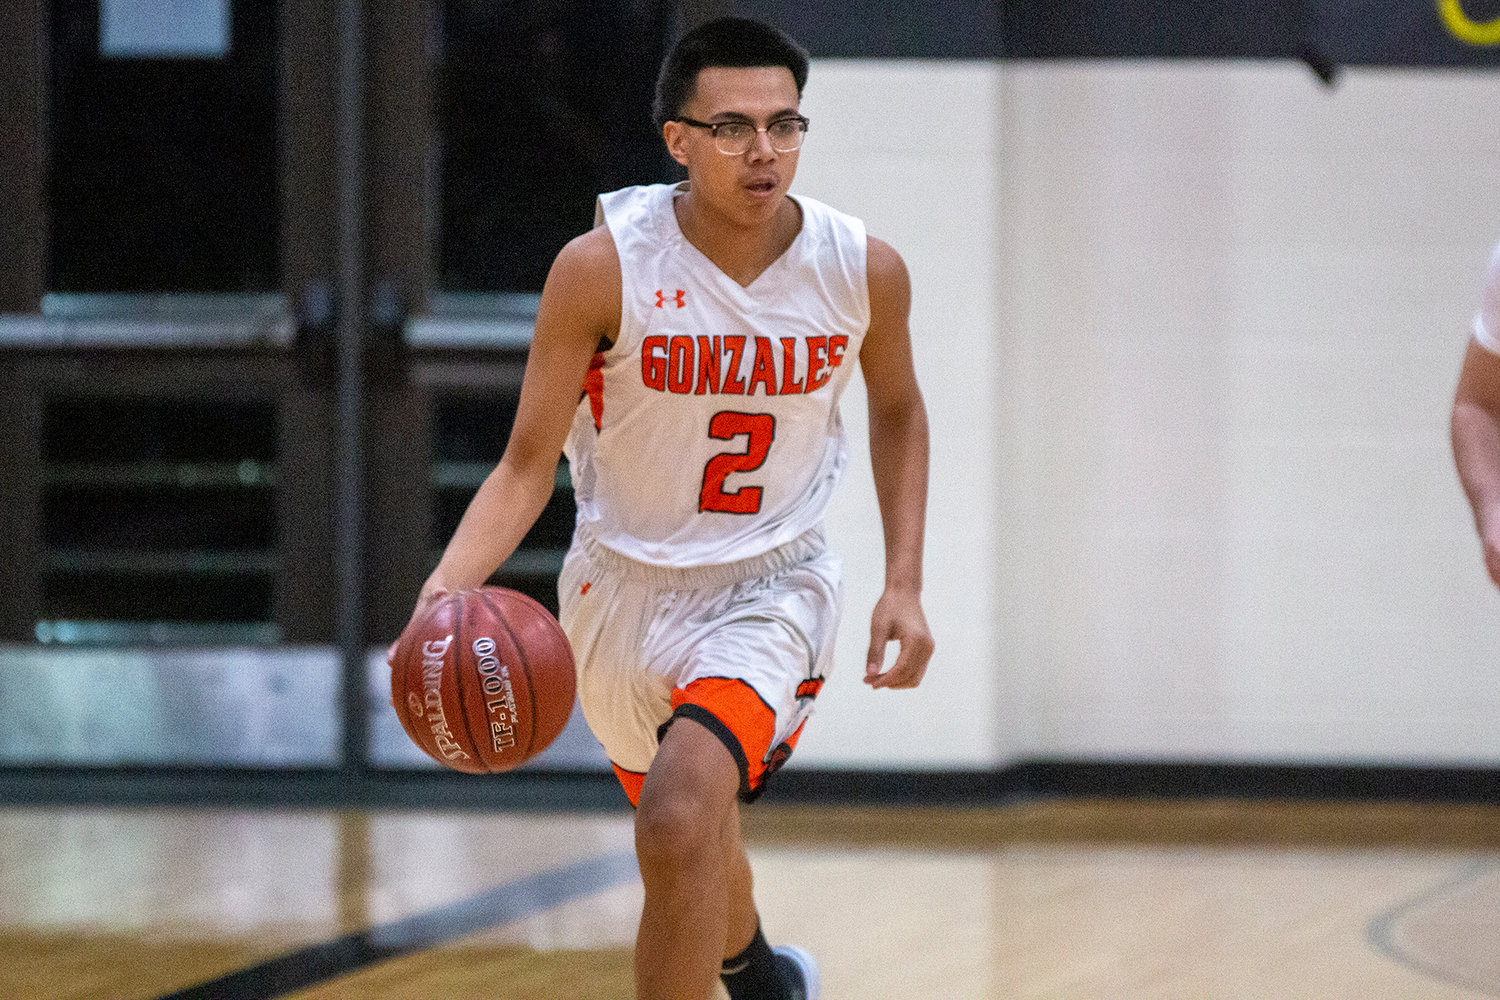 Xavier Aguayo (2) dribbles down the court in Gonzales’ 69-59 victory over Poteet at home.